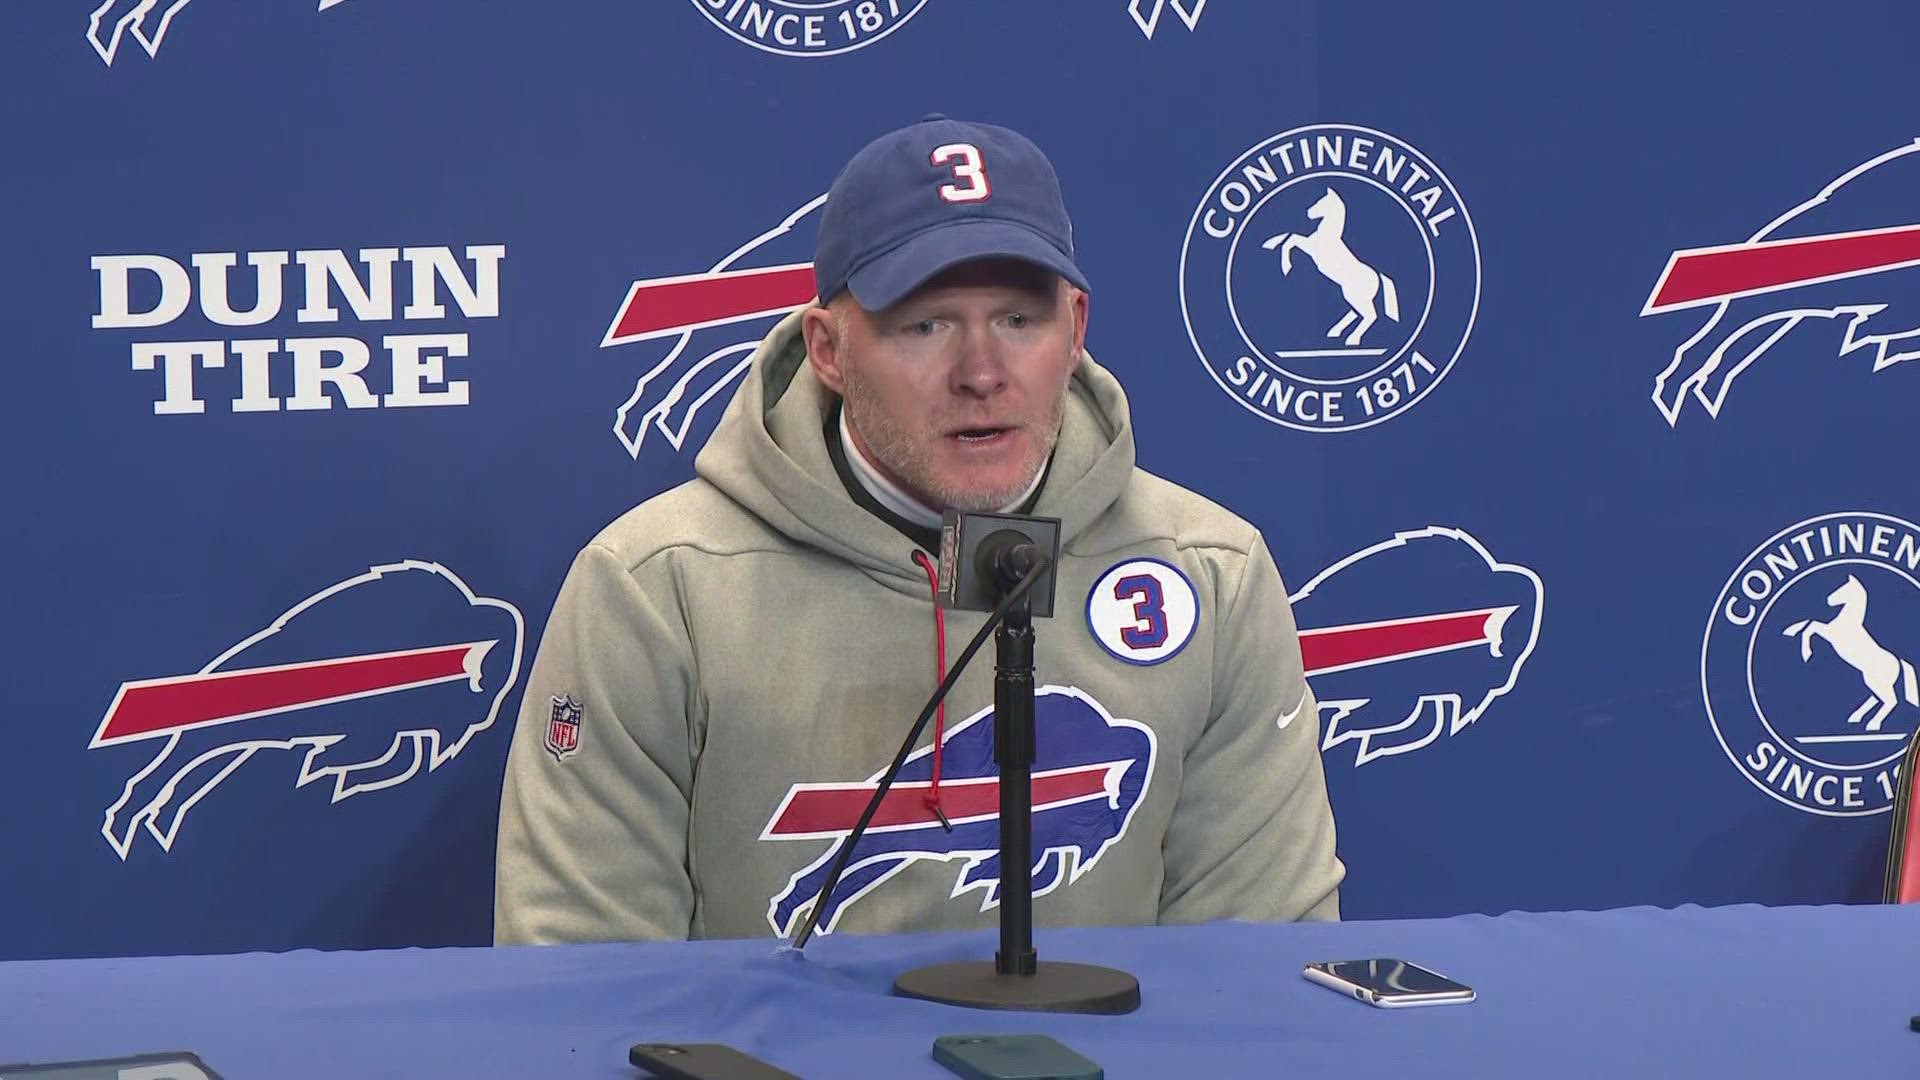 The Buffalo Bills discussed their 35-23 win vs. New England Patriots in Week 18. They also talked about Damar Hamlin and his improving health.